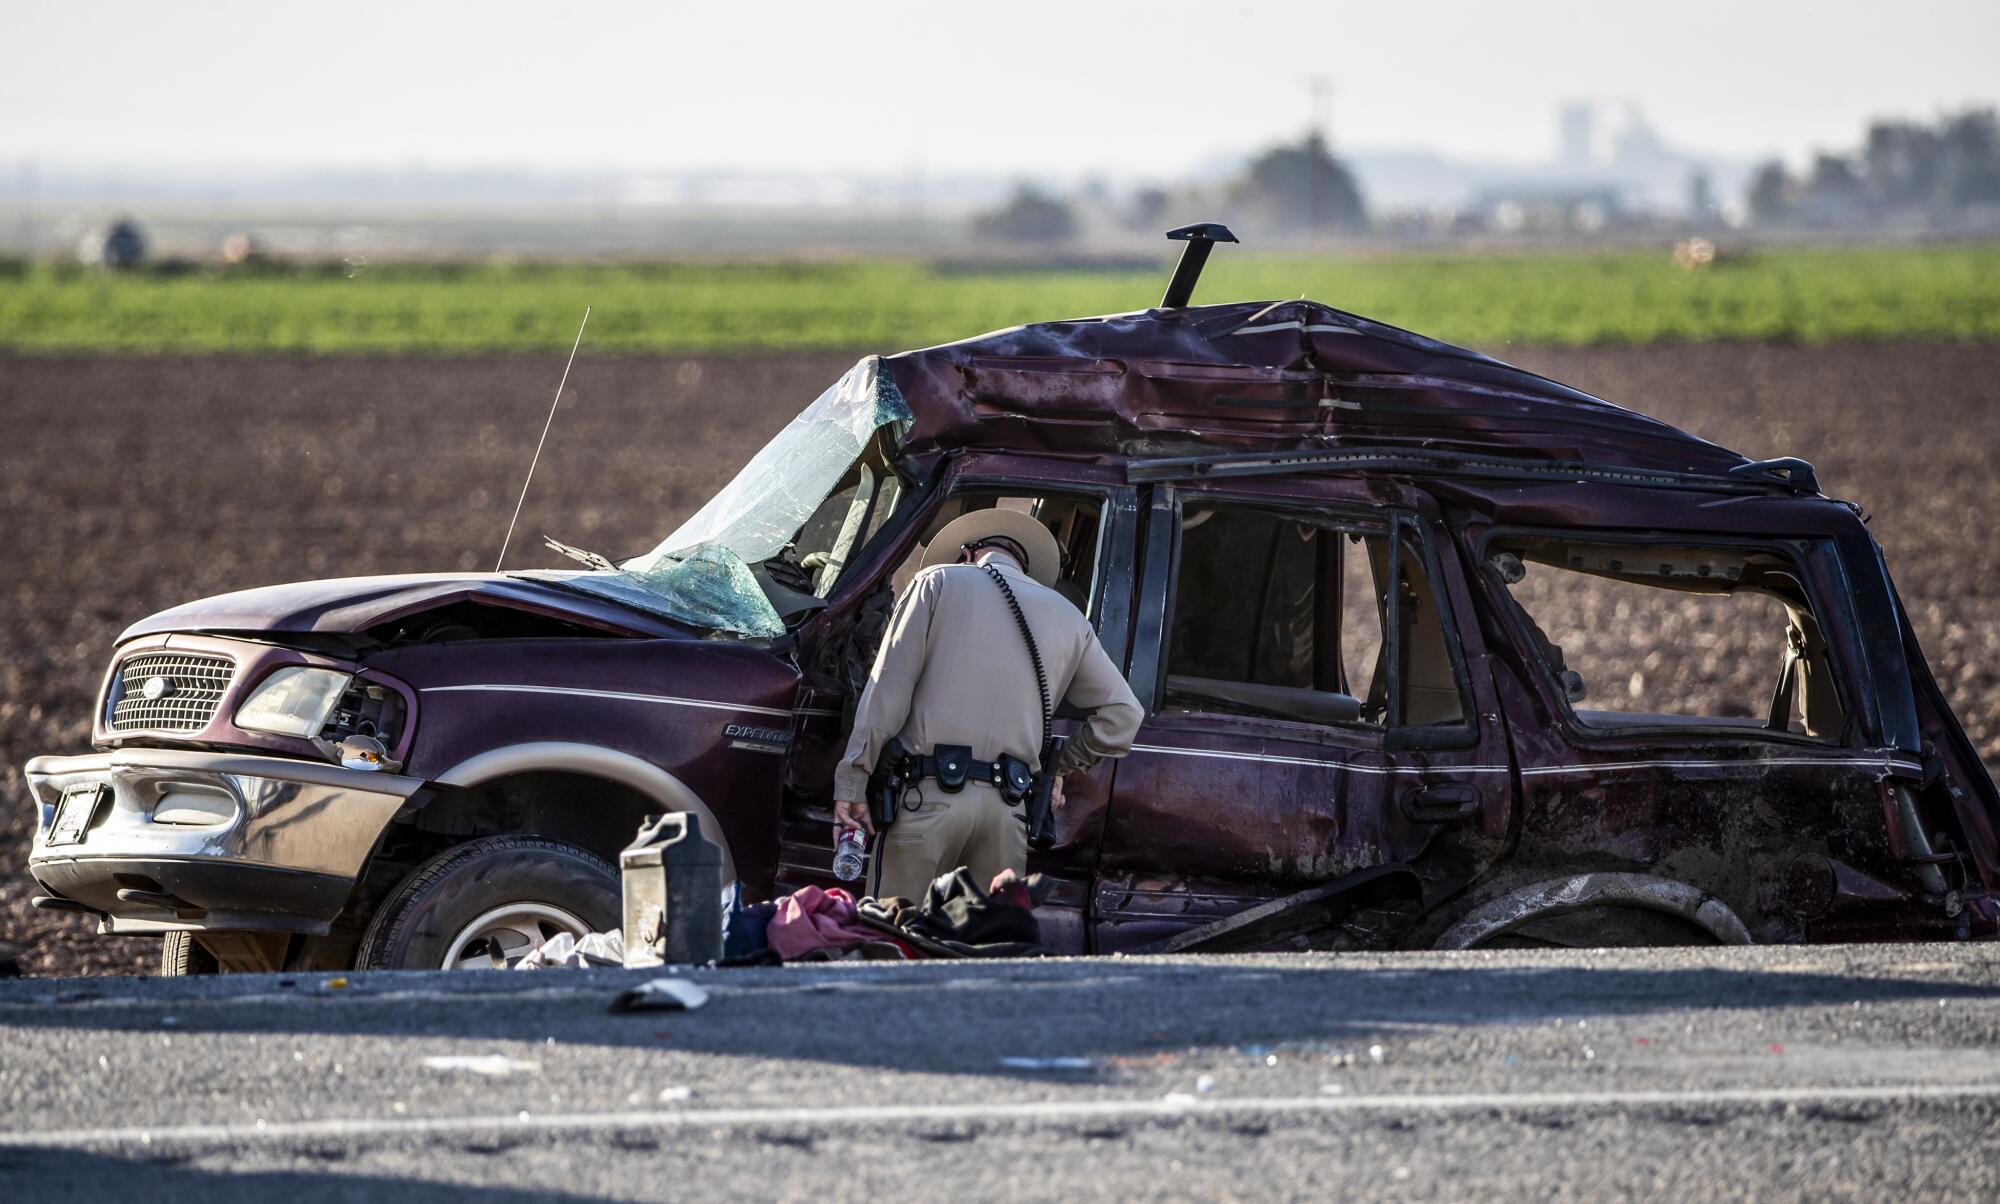 A CHP officer looks inside the mangled SUV involved in a fatal crash near the border